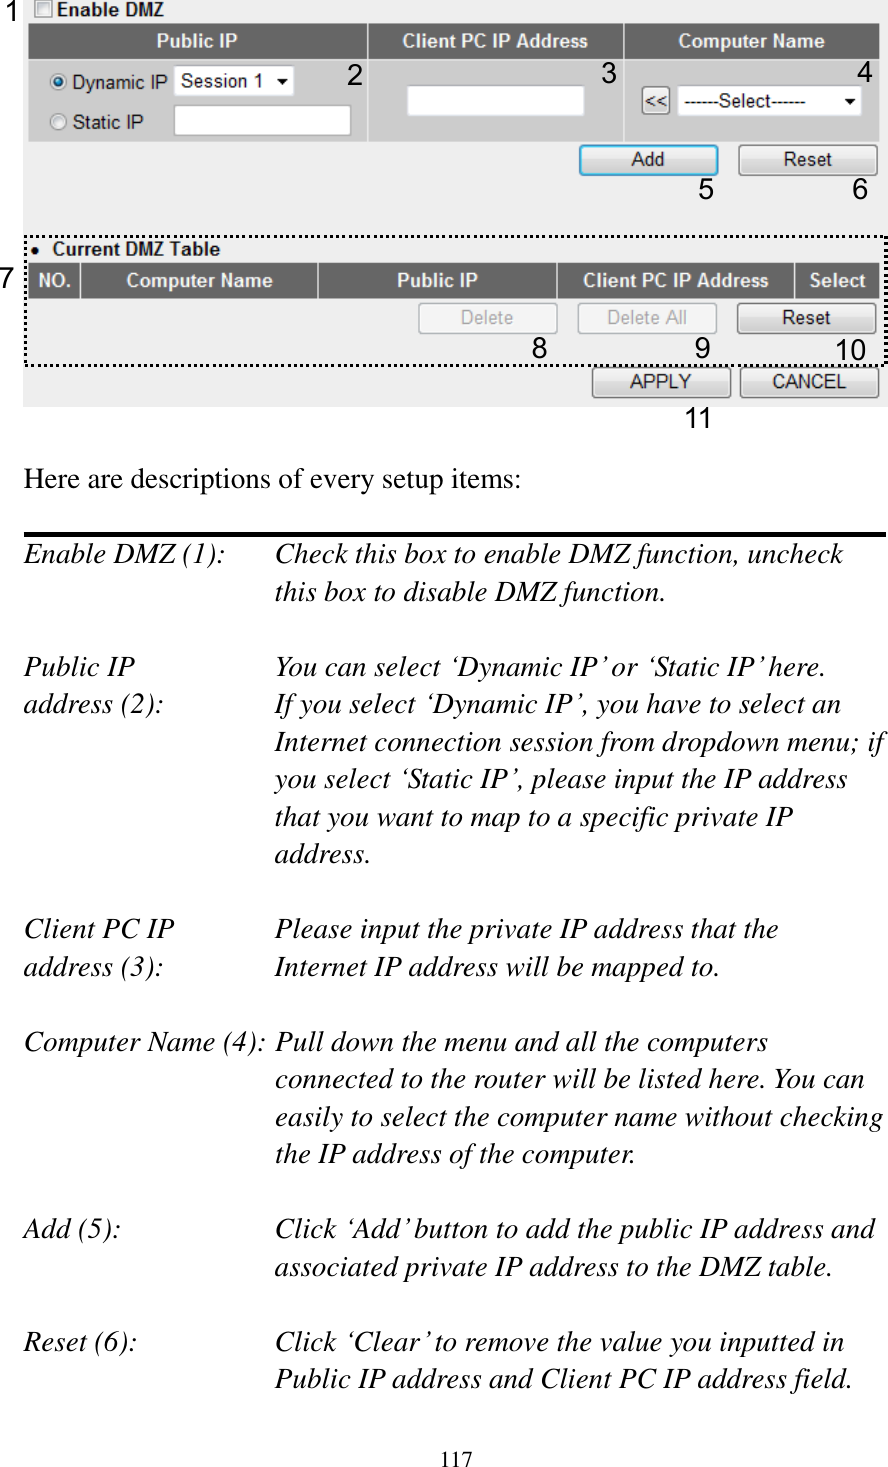 117   Here are descriptions of every setup items:  Enable DMZ (1):    Check this box to enable DMZ function, uncheck this box to disable DMZ function.  Public IP        You can select „Dynamic IP‟ or „Static IP‟ here. address (2):    If you select „Dynamic IP‟, you have to select an Internet connection session from dropdown menu; if you select „Static IP‟, please input the IP address that you want to map to a specific private IP address.  Client PC IP      Please input the private IP address that the address (3):      Internet IP address will be mapped to.  Computer Name (4): Pull down the menu and all the computers connected to the router will be listed here. You can easily to select the computer name without checking the IP address of the computer.  Add (5):    Click „Add‟ button to add the public IP address and associated private IP address to the DMZ table.  Reset (6):    Click „Clear‟ to remove the value you inputted in Public IP address and Client PC IP address field. 1 2 4 5 6 7 8 9 10 11 3 